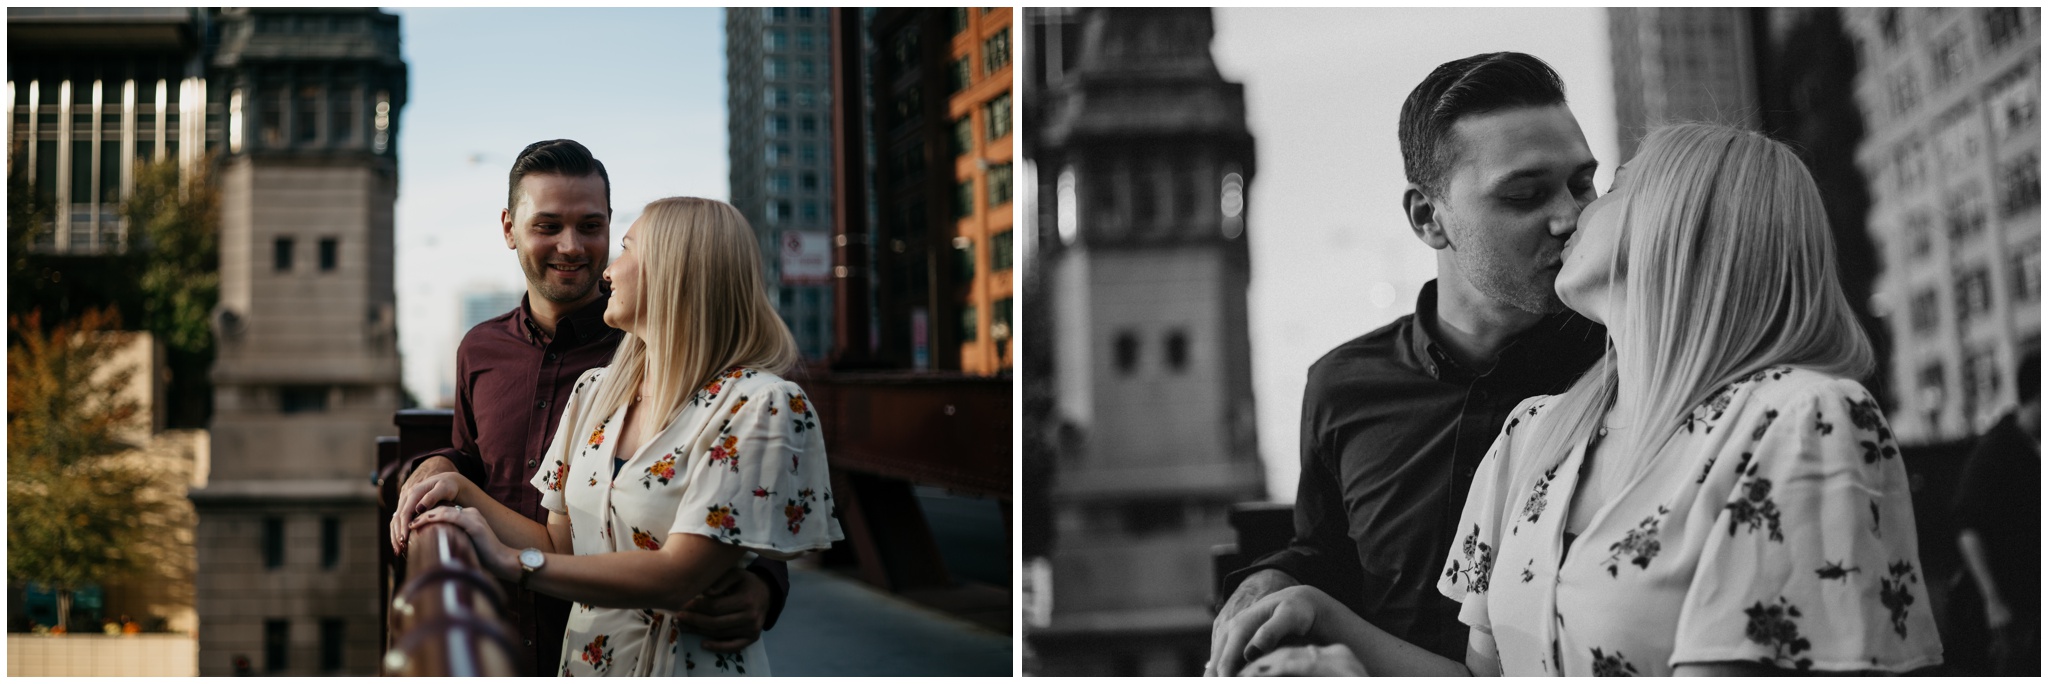 The Morros Wedding Photography Melissa and Anil Downtown Chicago Engagement Session_0443.jpg